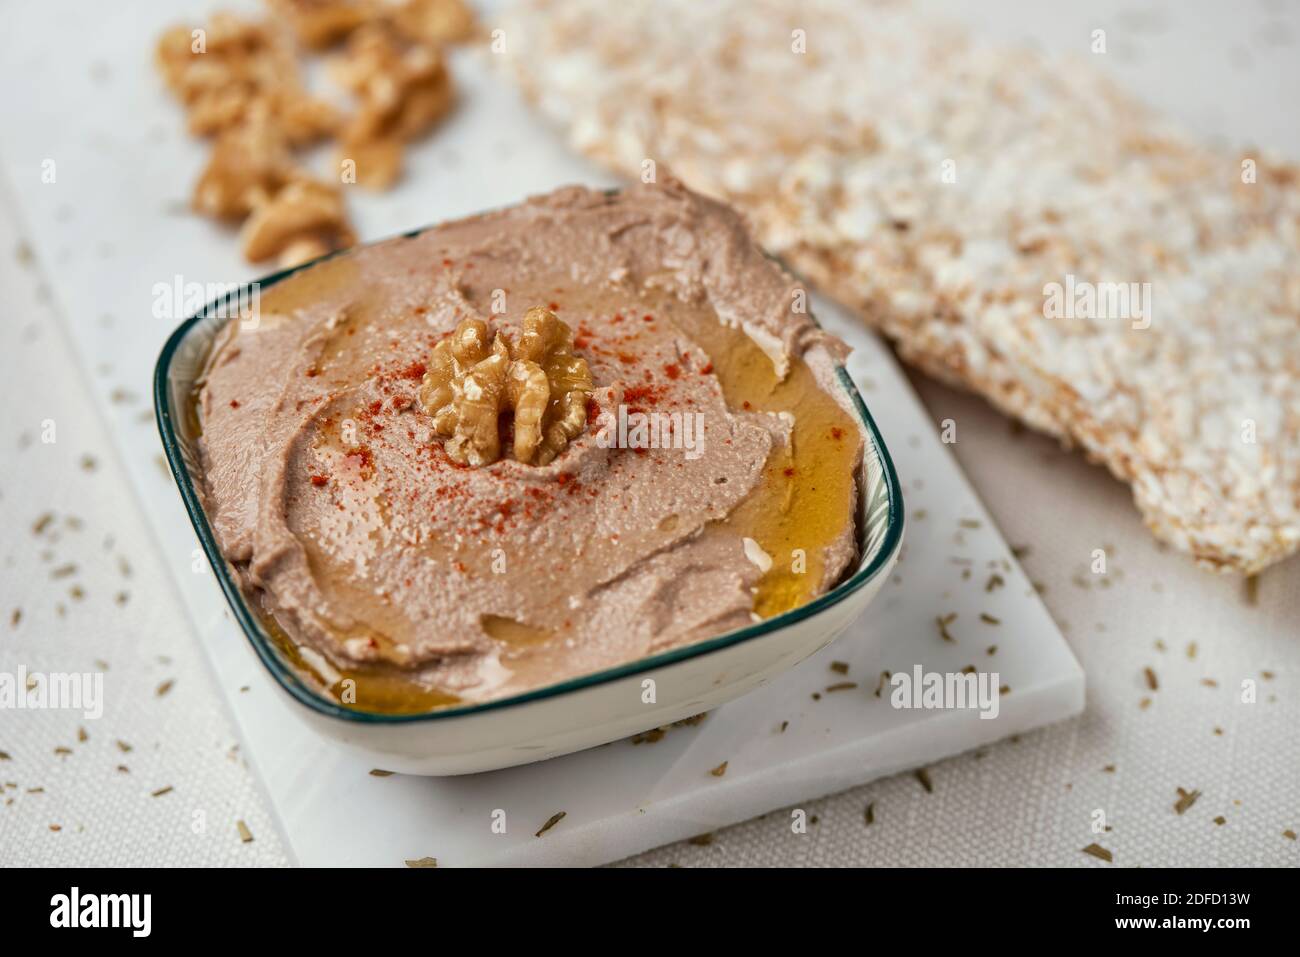 closeup of a bowl with an appetizing hummus, made with chickpea, walnut and rosemary, on a table, next to some puffed rice cakes Stock Photo